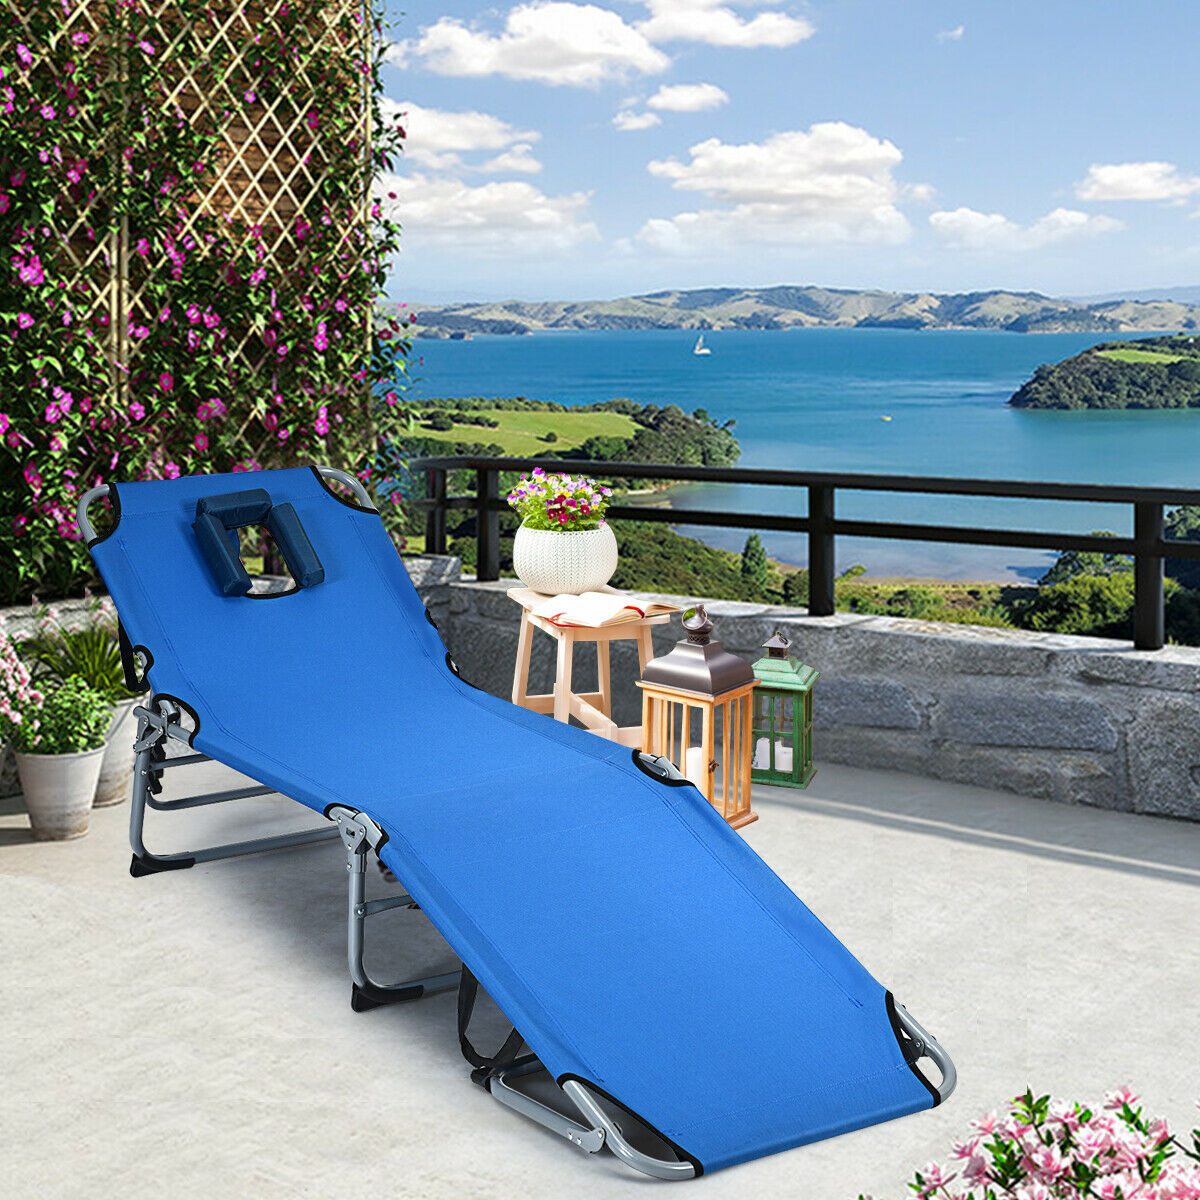 Folding Chaise Lounge Chair Bed Adjustable Outdoor Patio Beach Camping Recliner - Blue